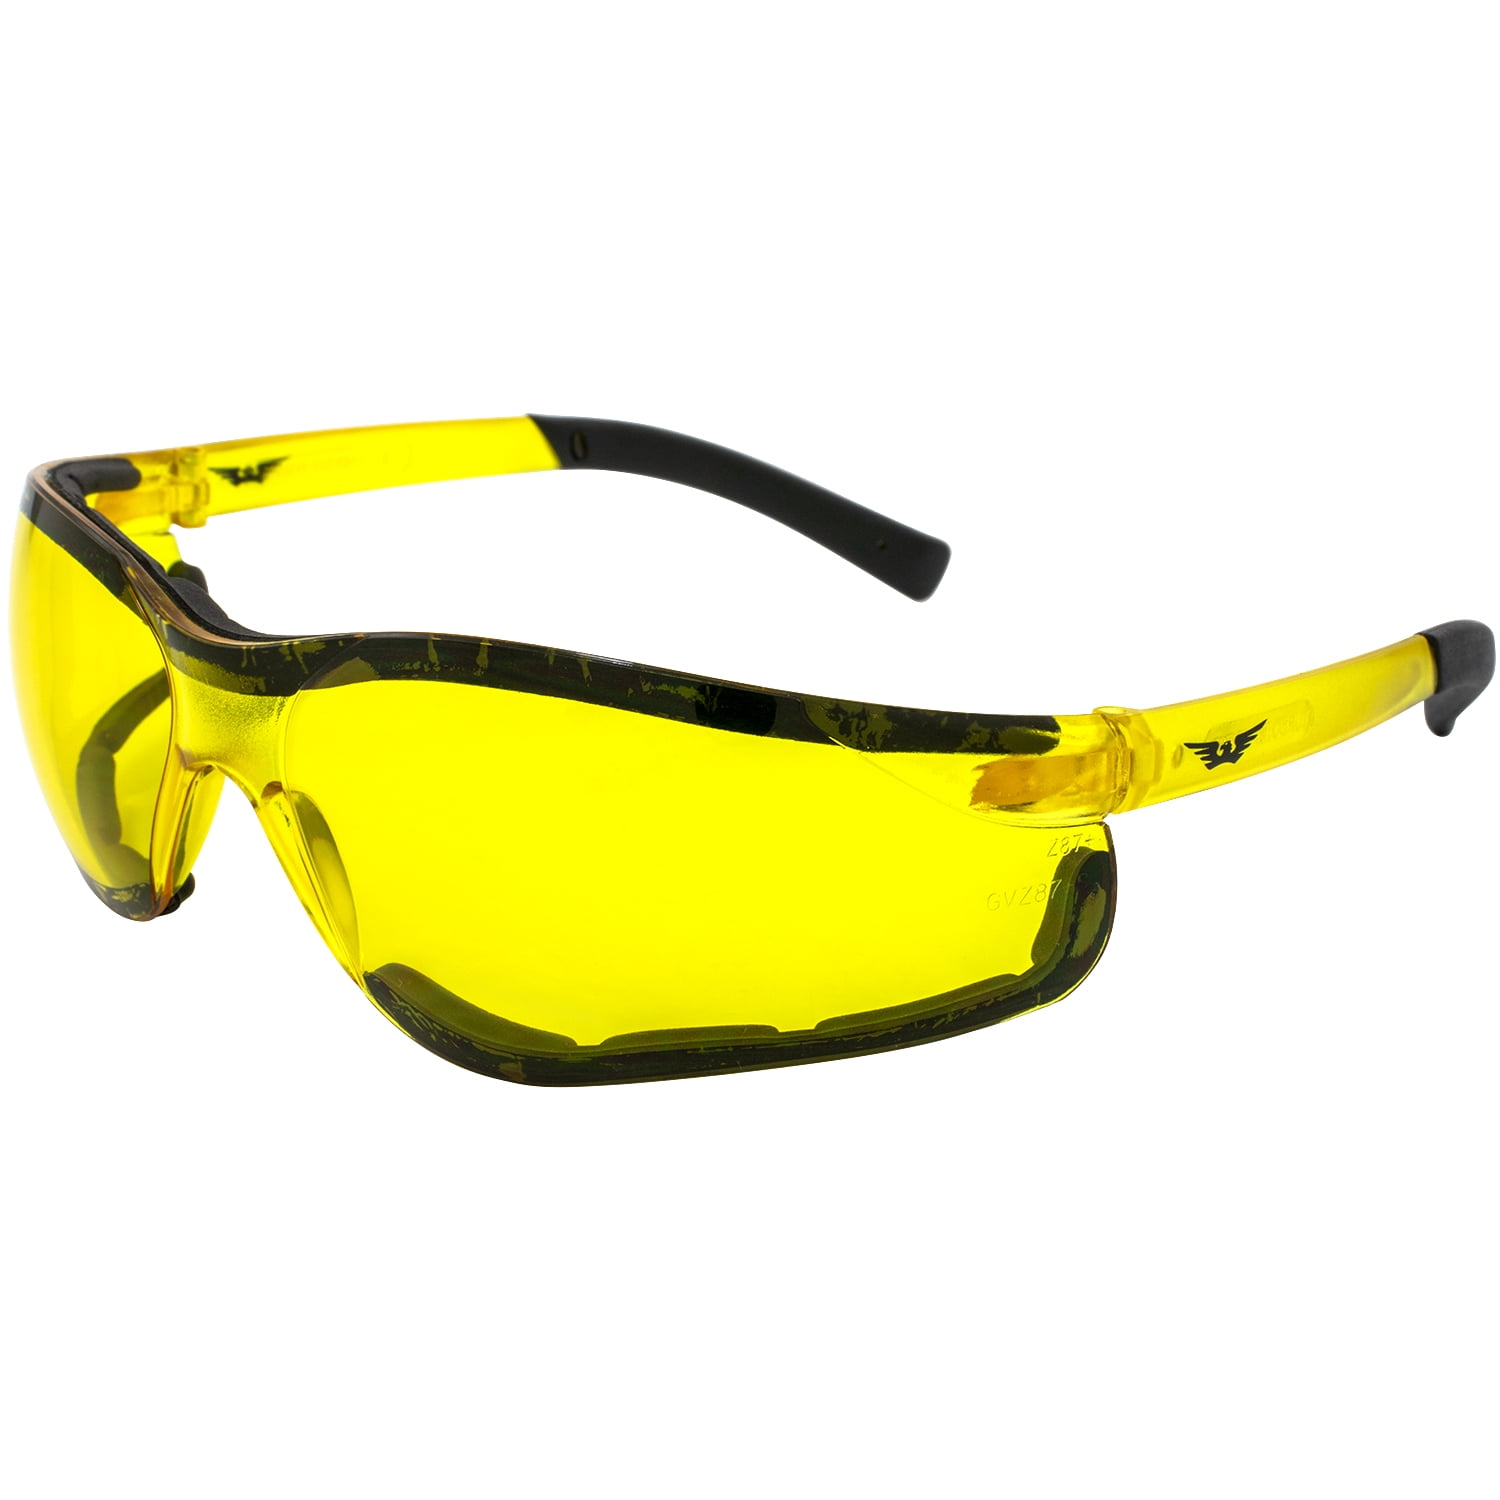 Global Vision Rider Plus Yellow Foam Pad Safety Glasses Sun Night Driving Z87+